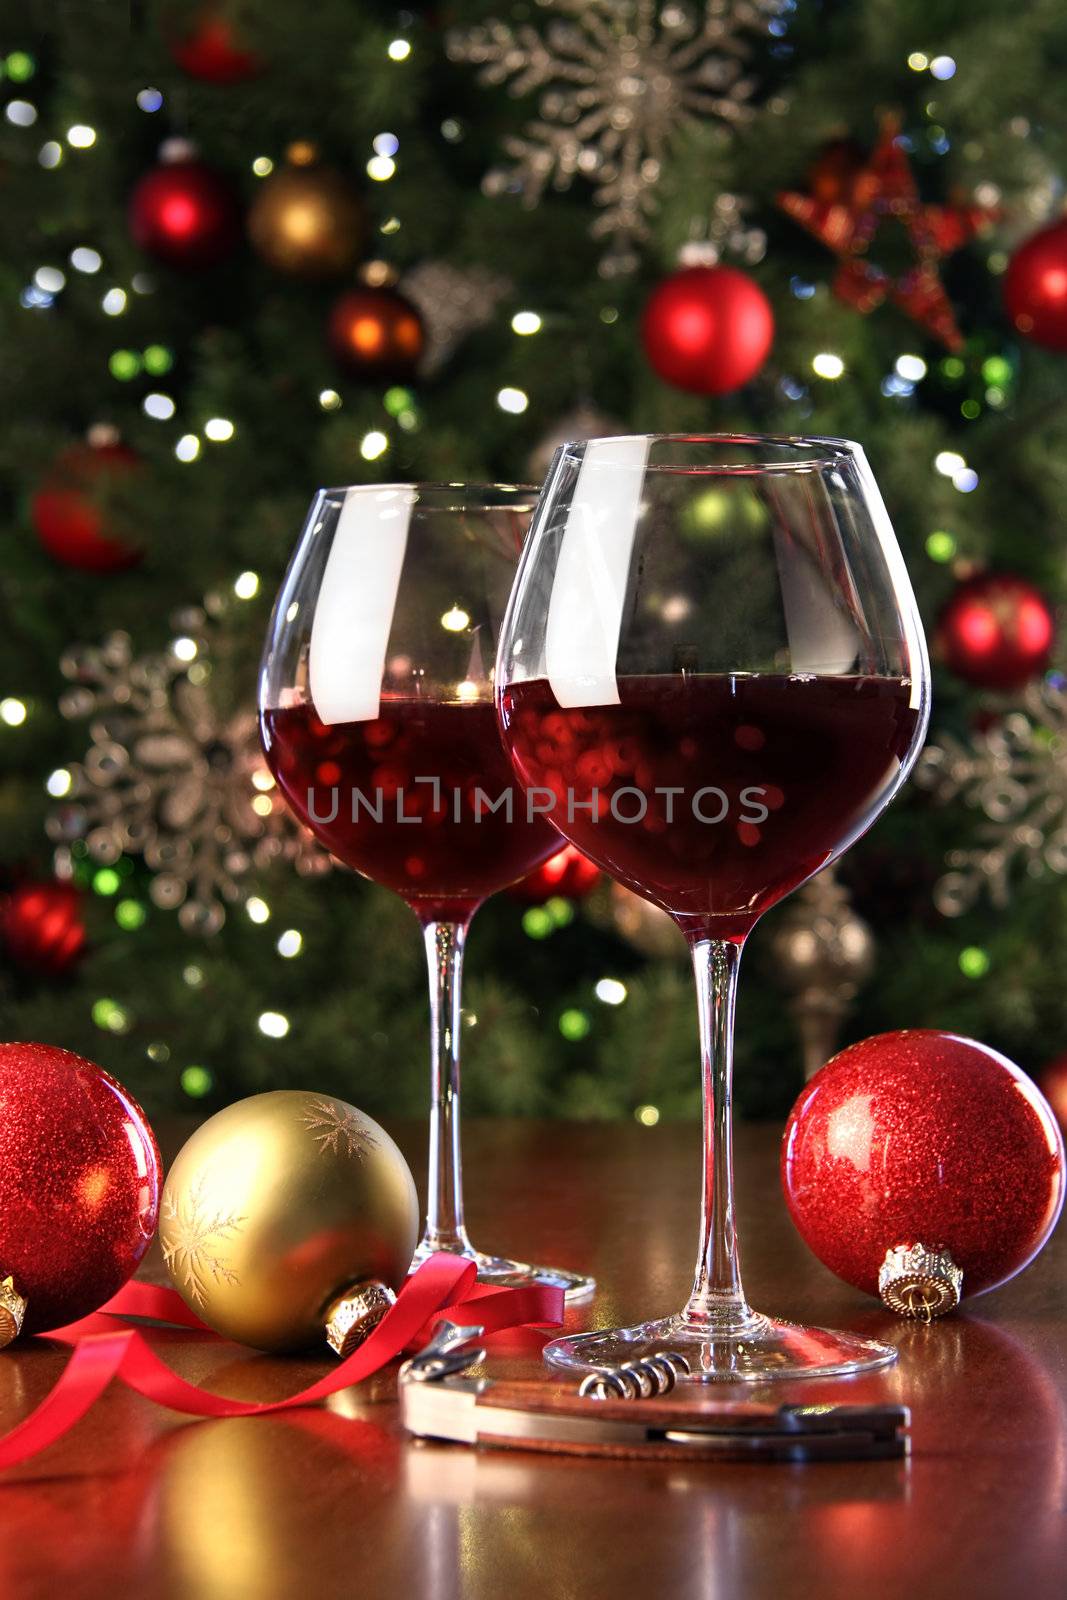 Glasses of red wine in front of Christmas tree by Sandralise